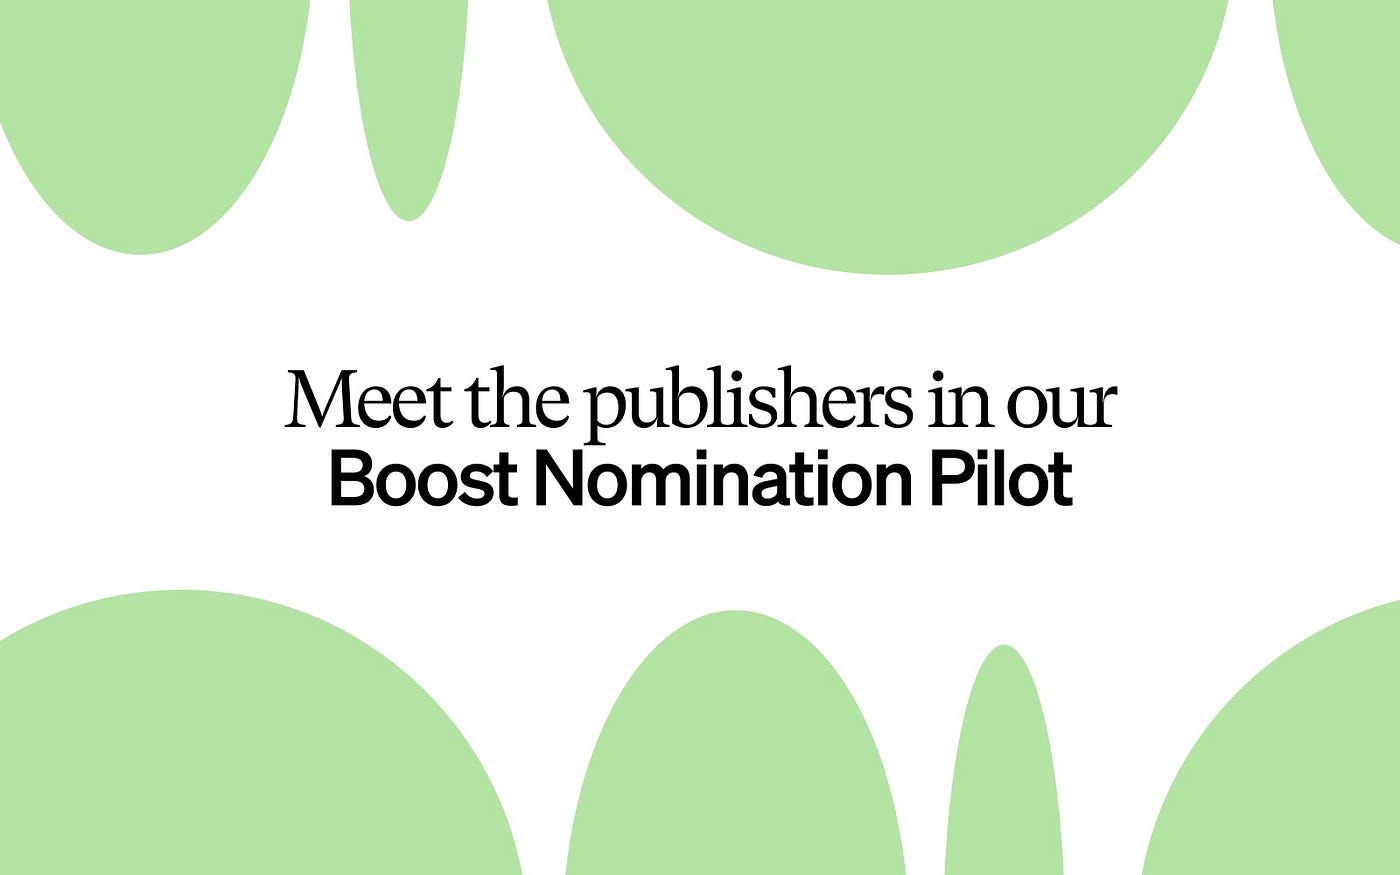 Meet the publishers in Medium's Boost Nomination Pilot